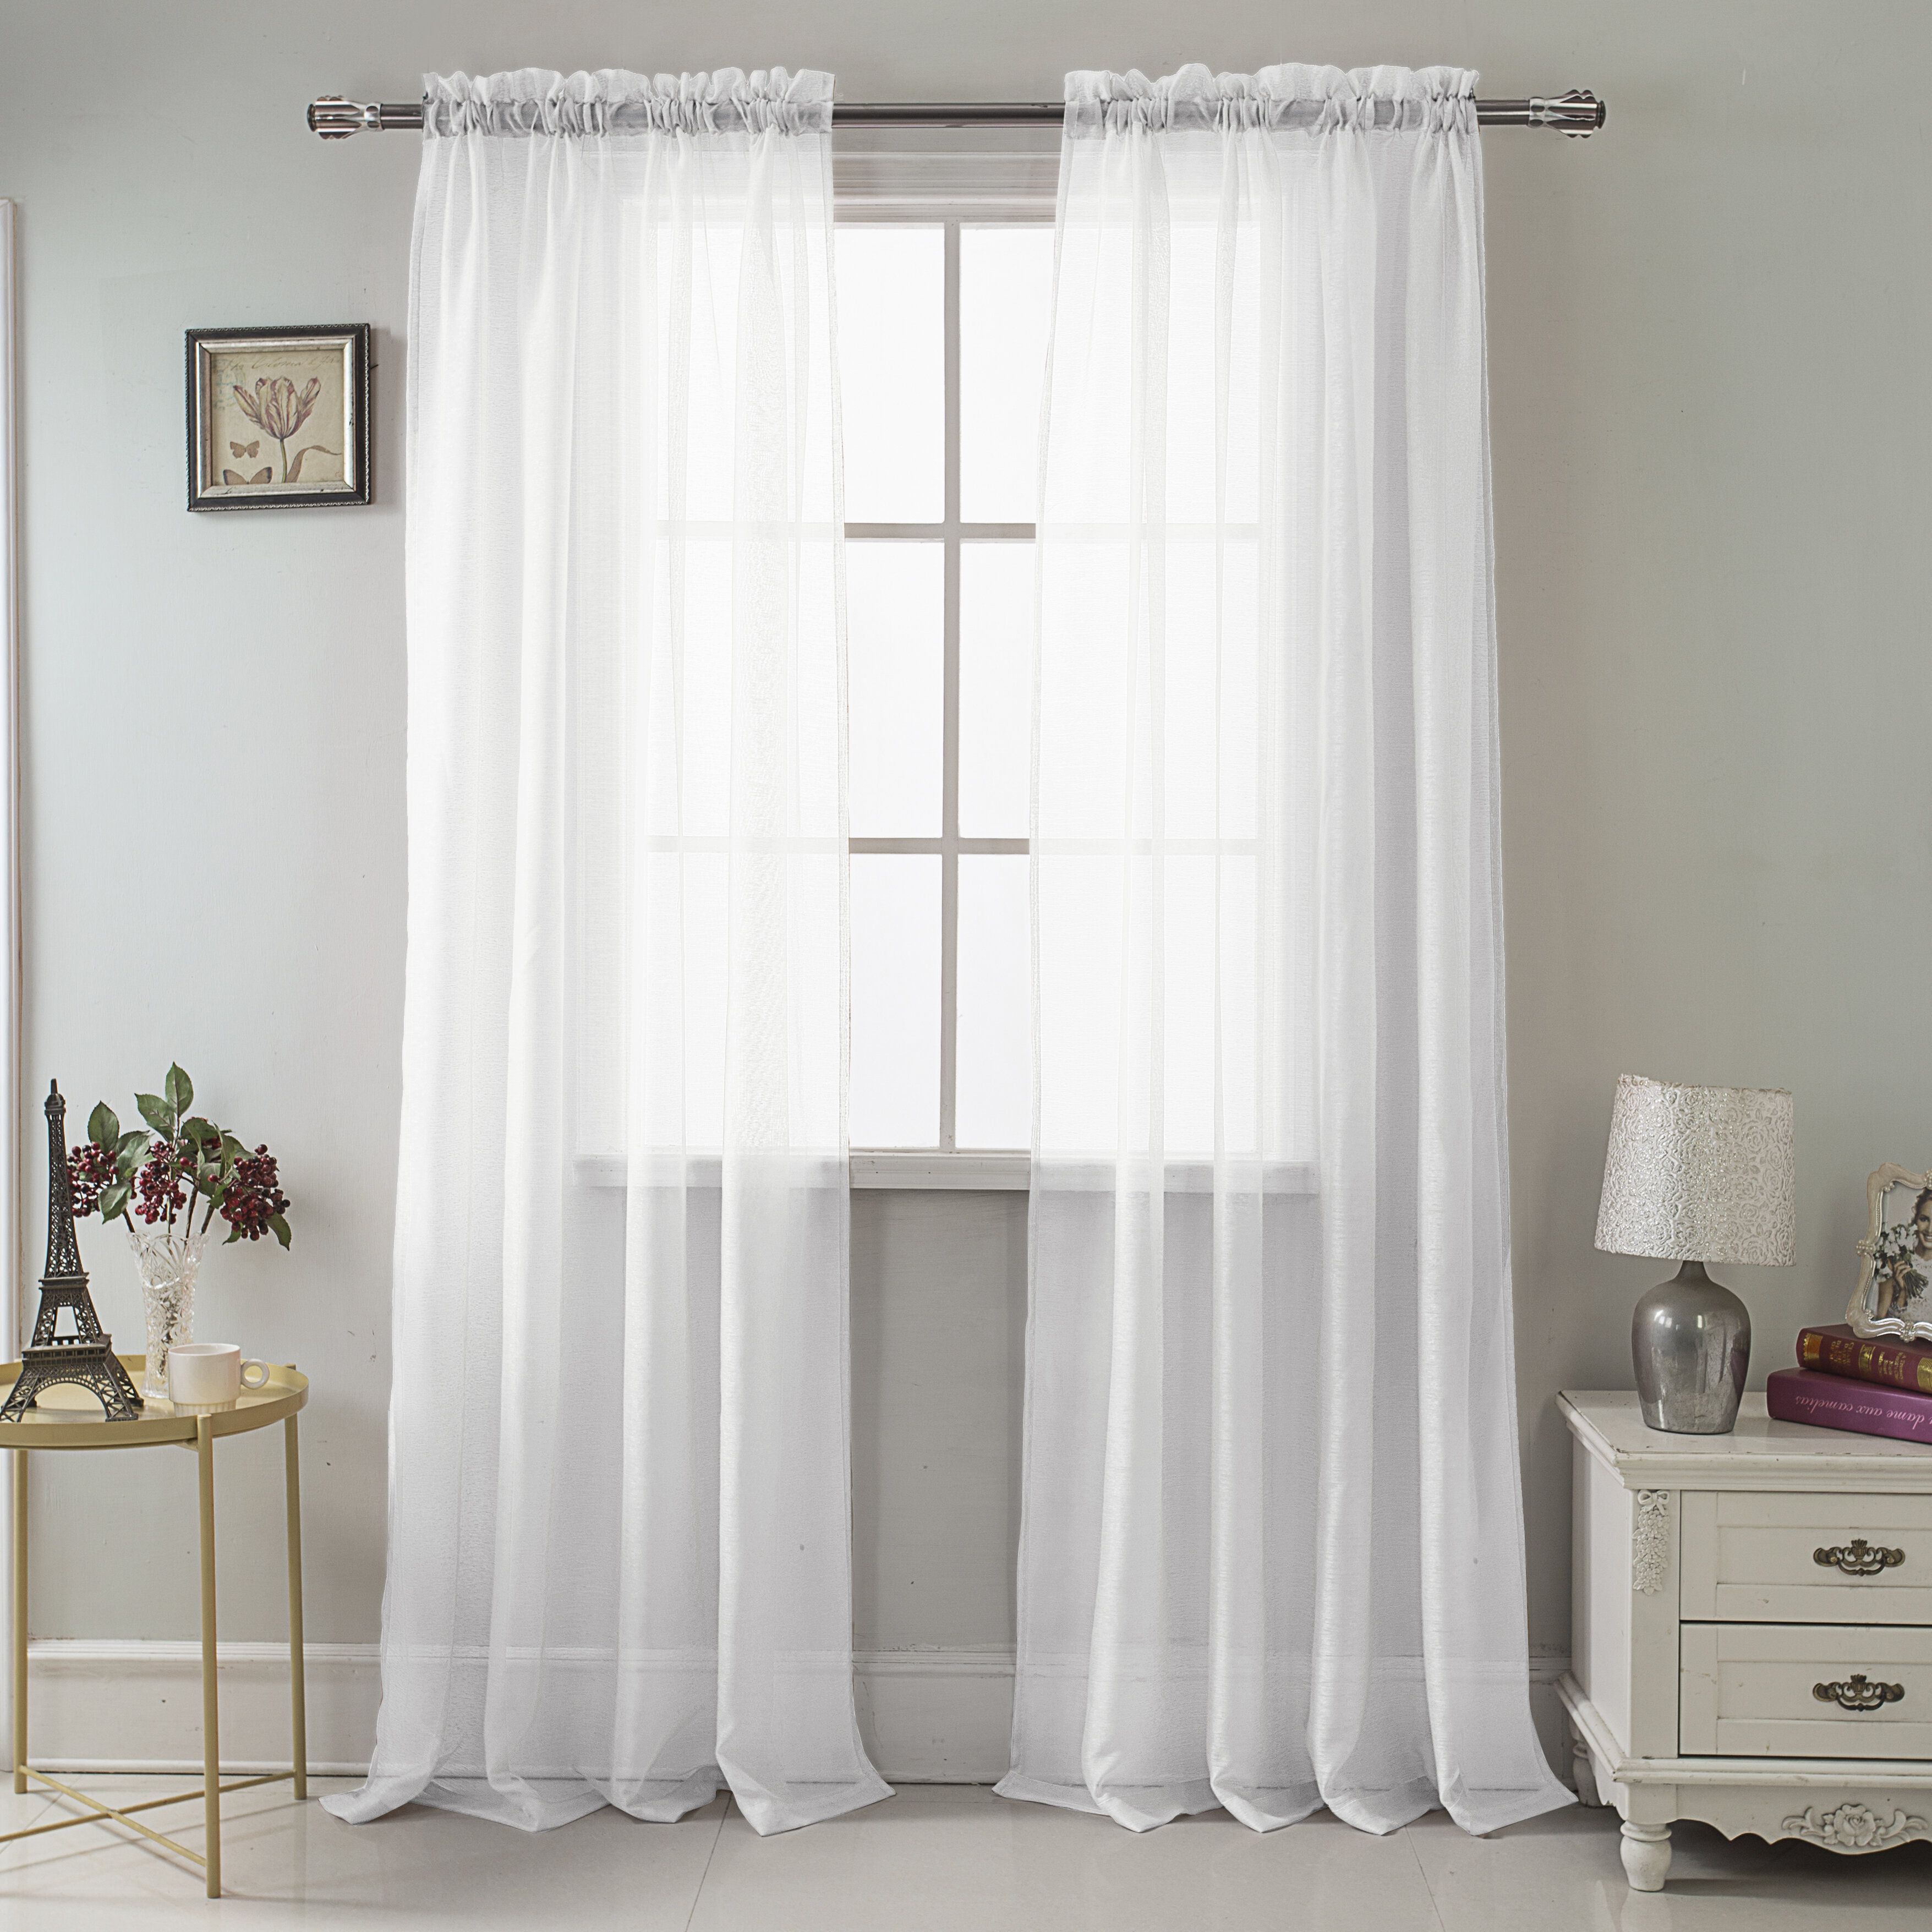 Harriet Bee Daron Solid Sheer Rod Pocket Curtains & Reviews For Arm And Hammer Curtains Fresh Odor Neutralizing Single Curtain Panels (View 13 of 20)